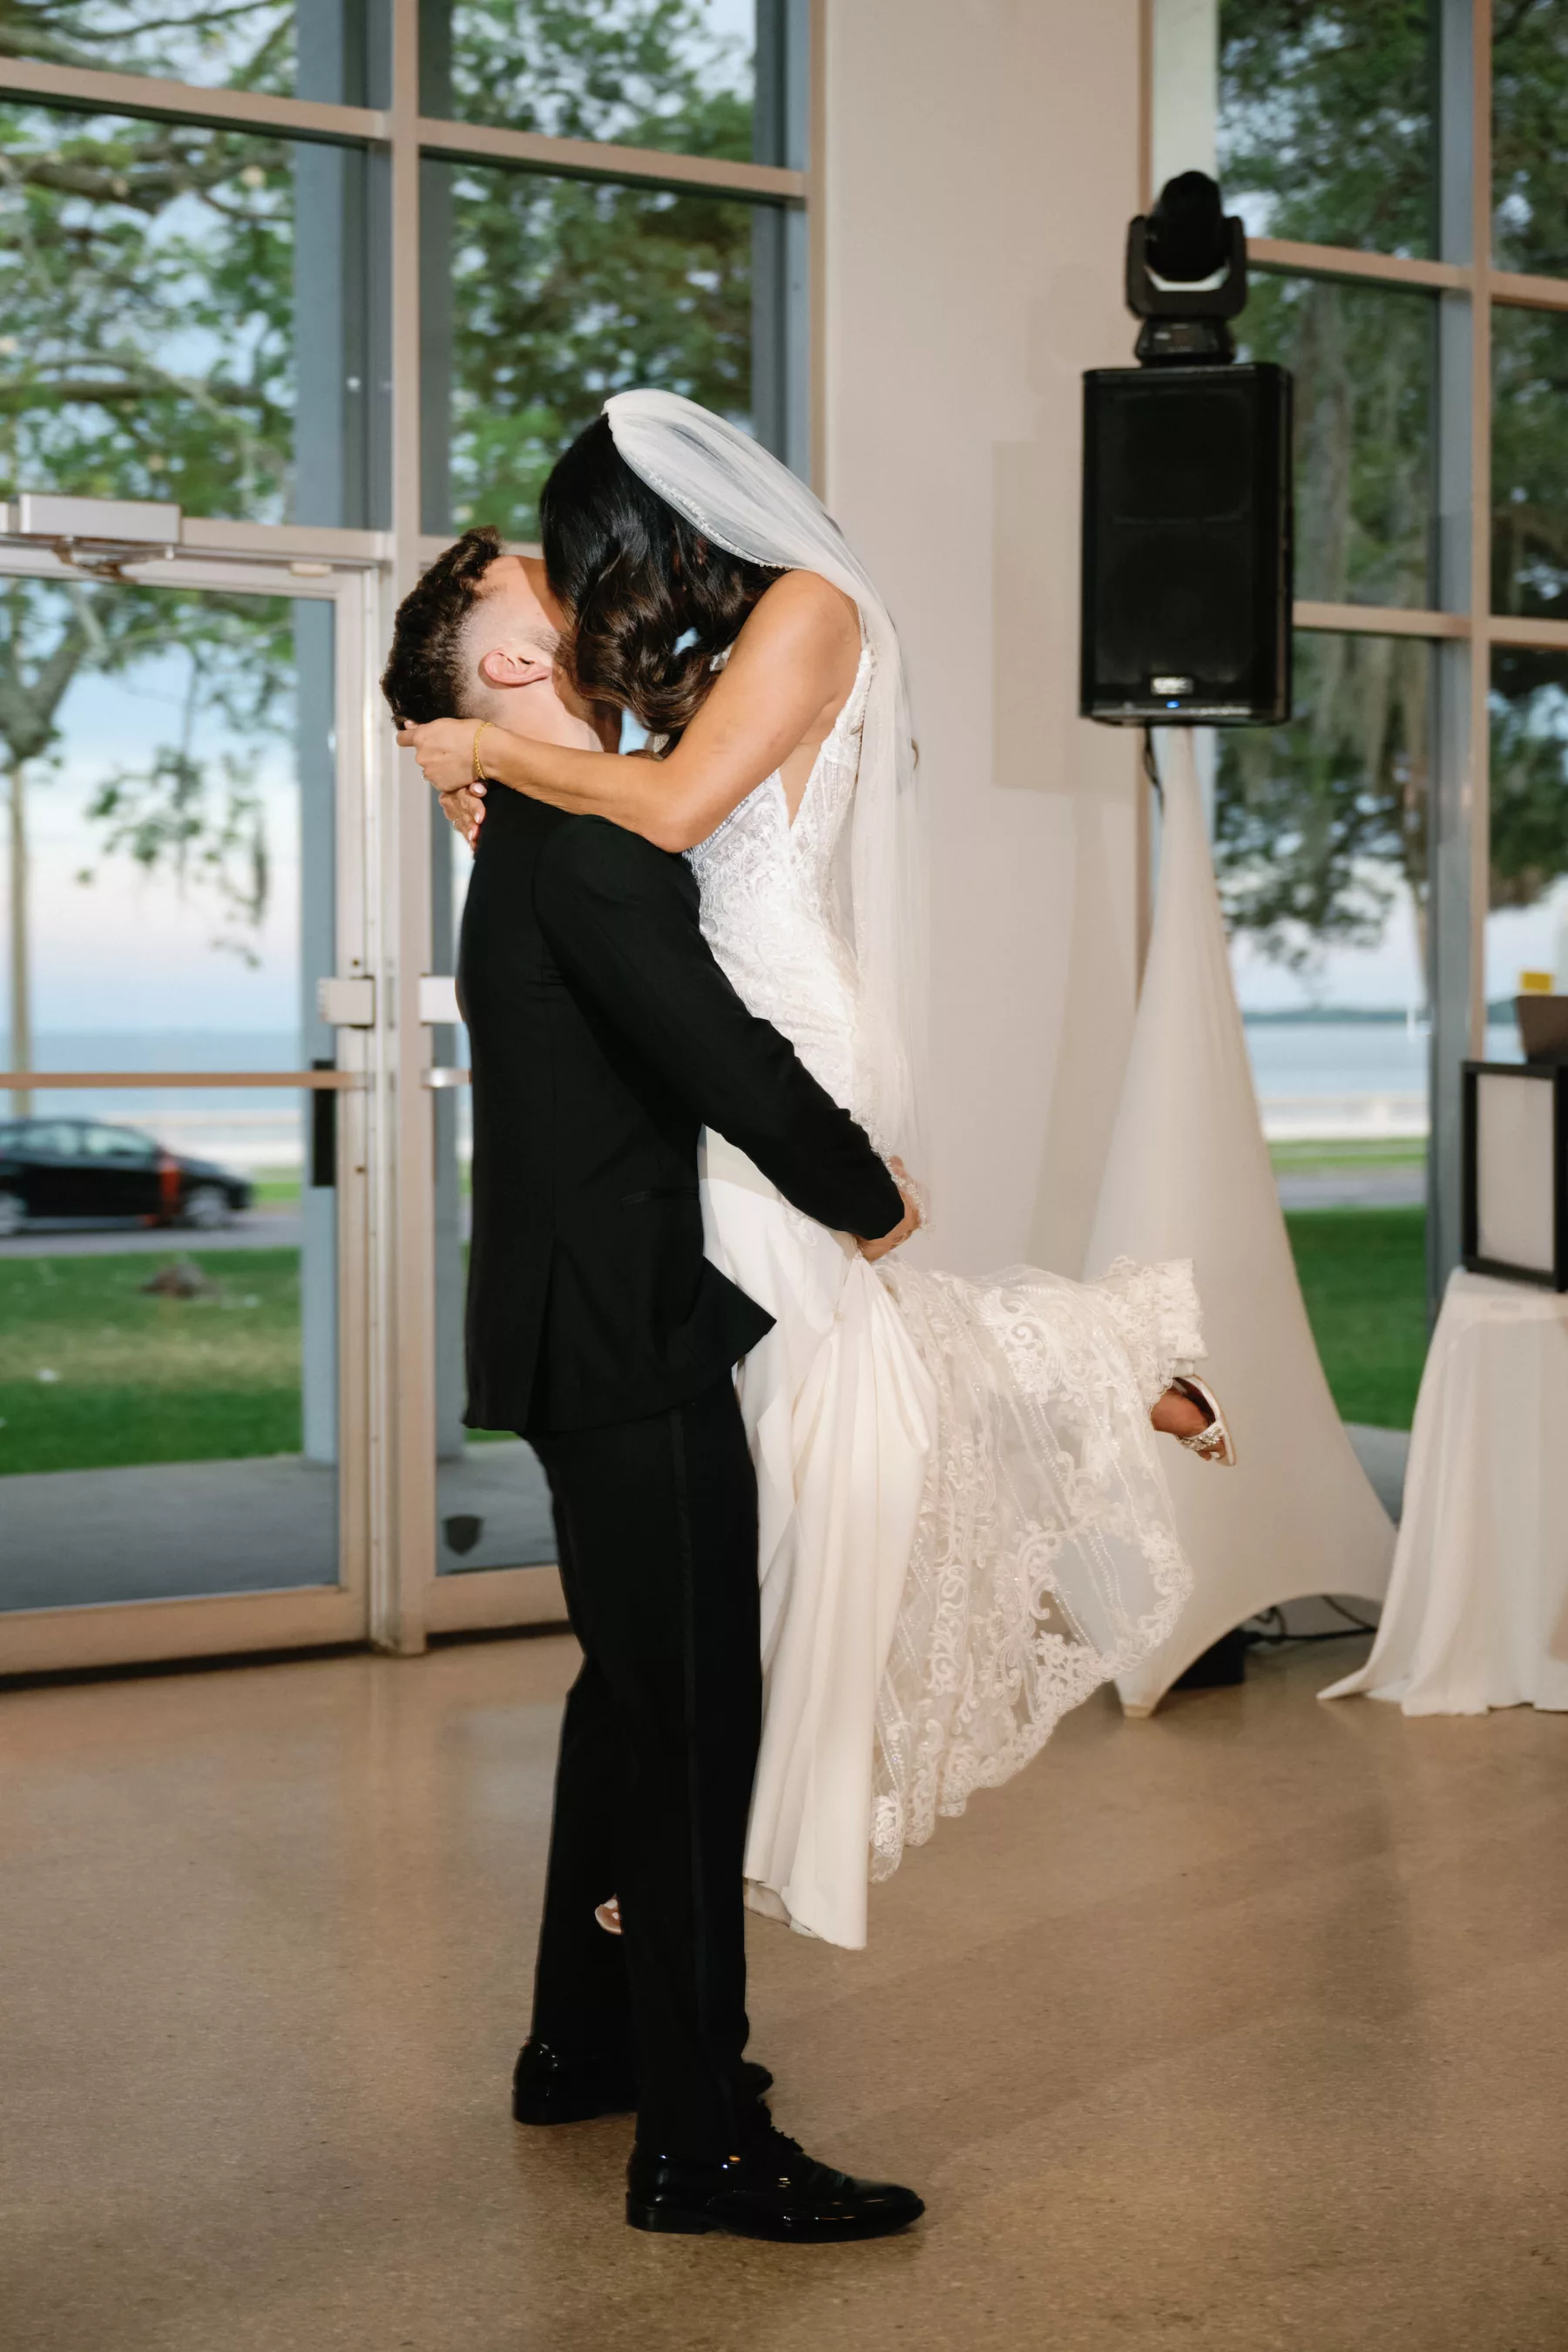 Bride and Groom Private First Dance Wedding Portrait | Tampa Bay DJ Grant Hemond and Associates